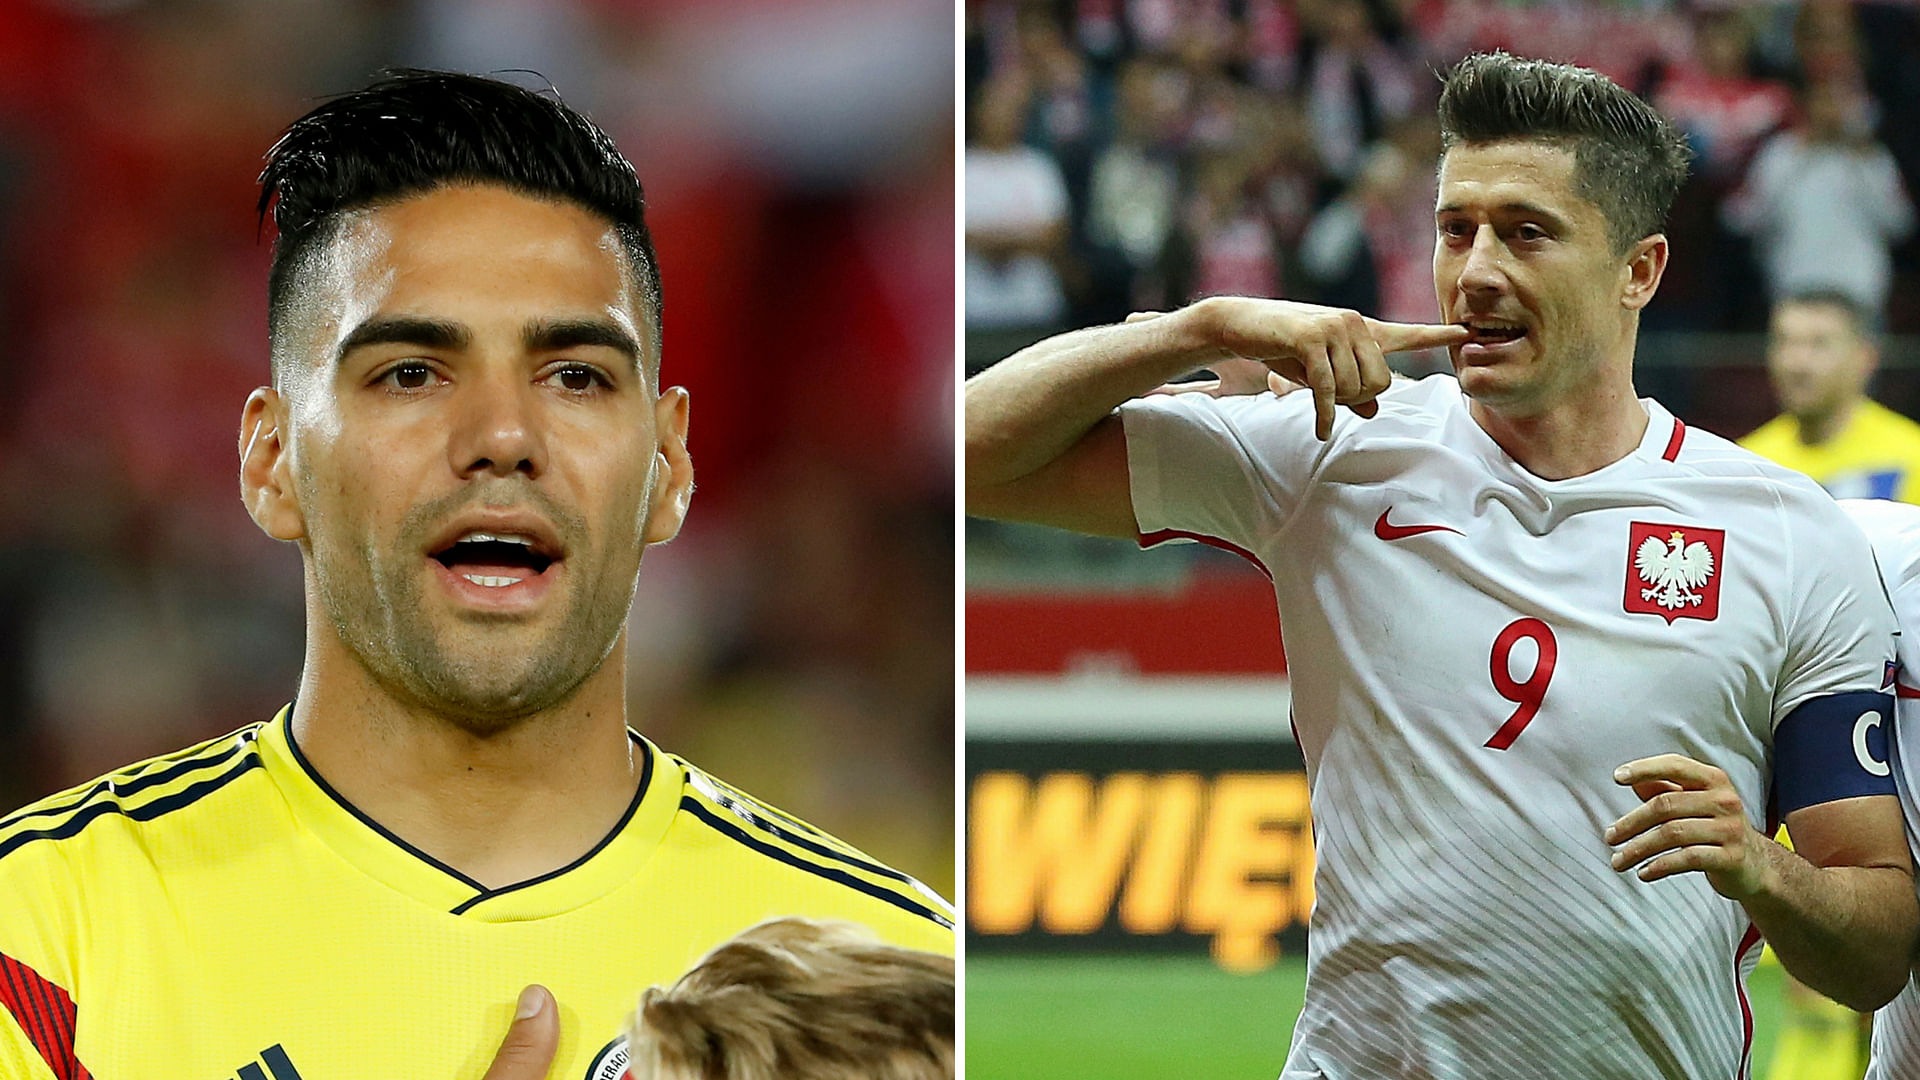 Captains and all time leading goalscorers for their national teams, Falcao (left) and Lewandowski will lead Colombia and Poland respectively.